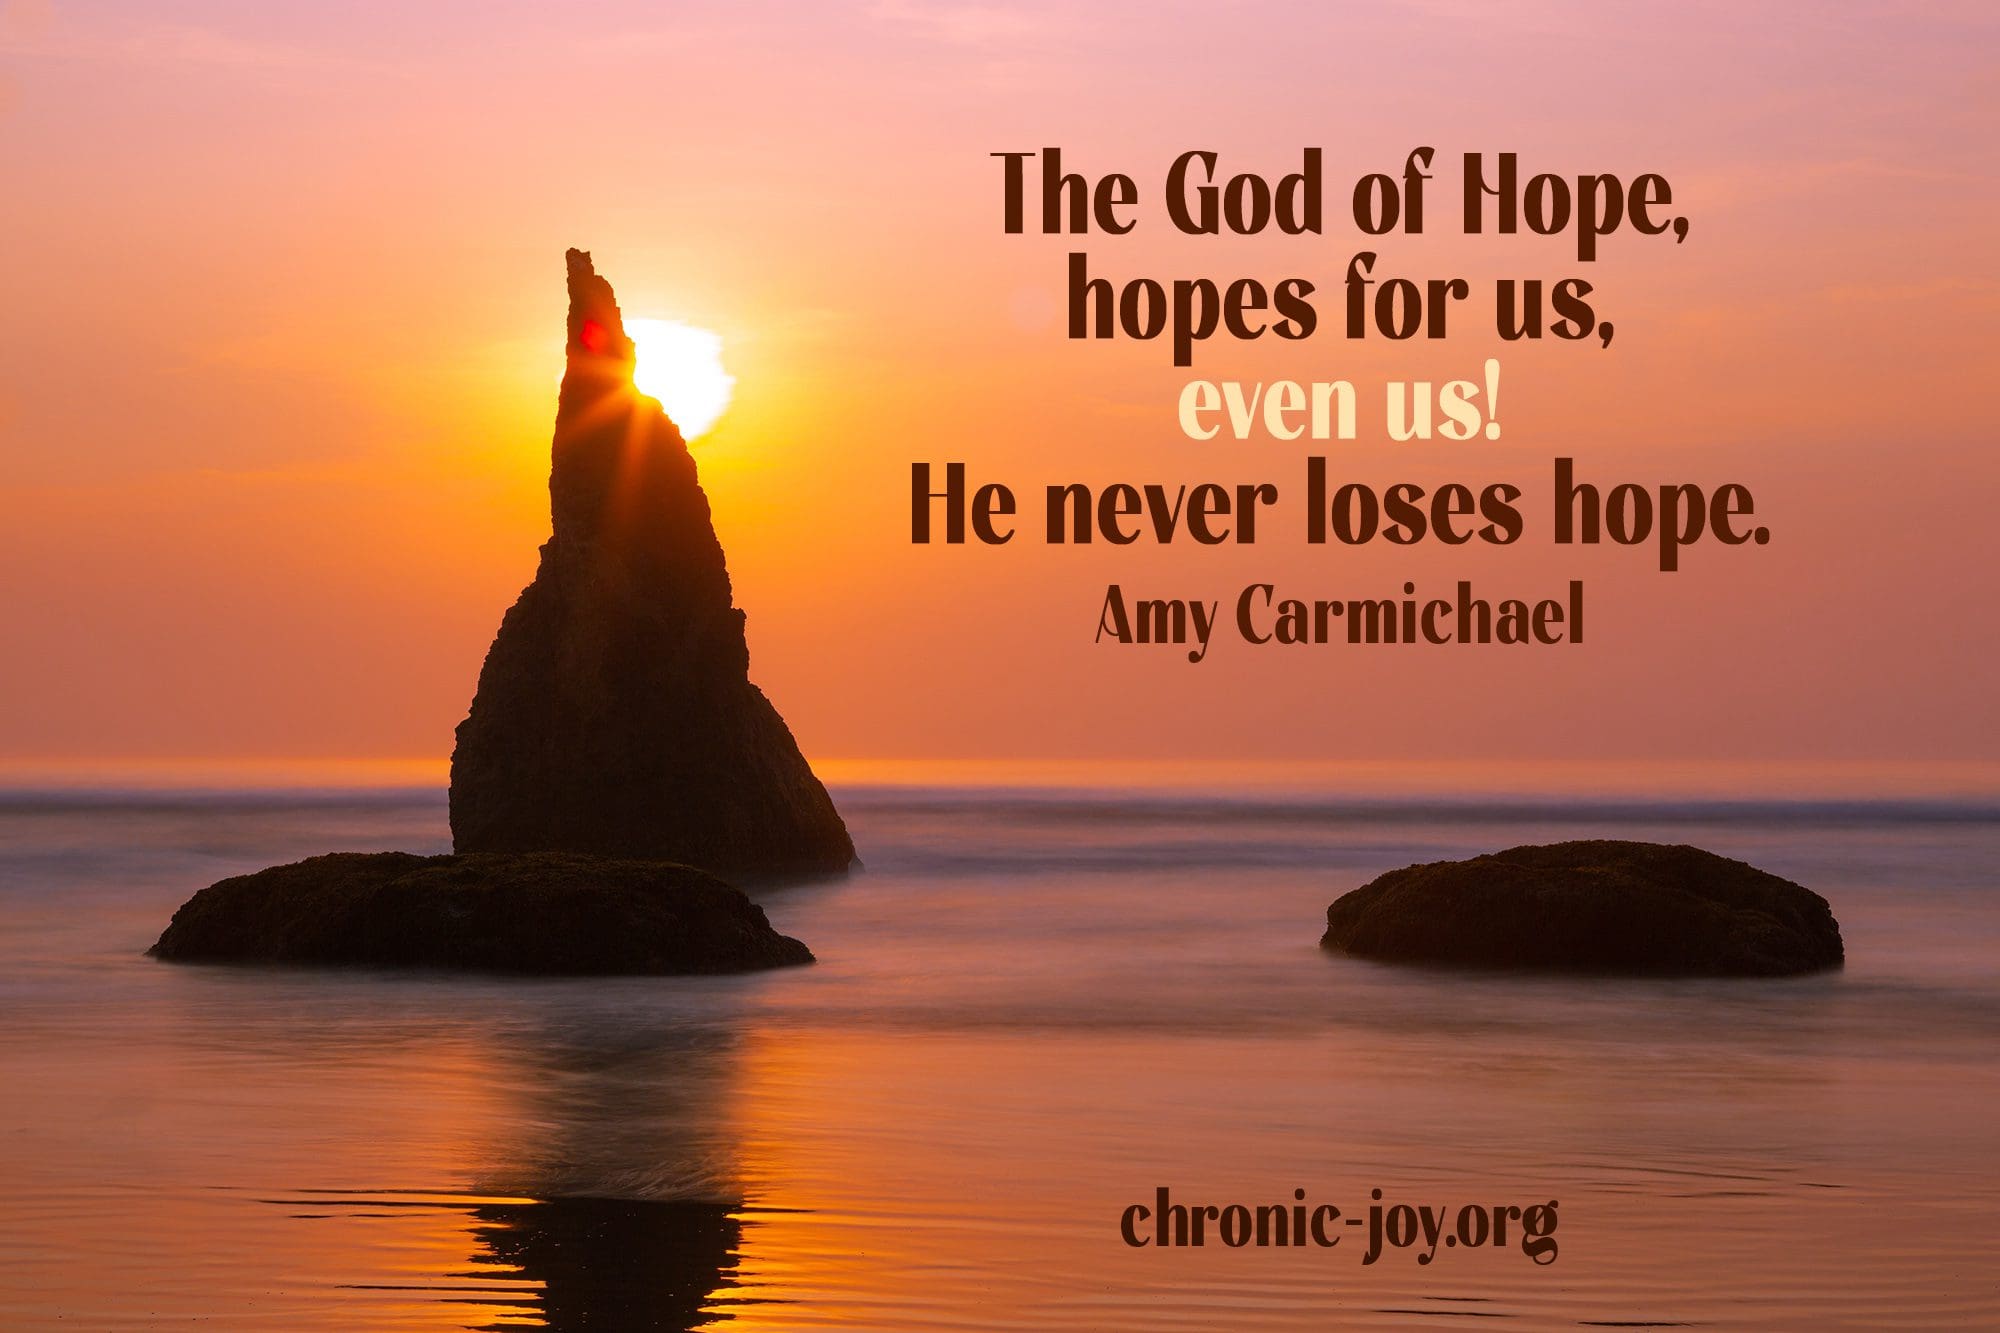 "The God of Hope, hopes for us, even us! He never loses hope." Amy Carmichael